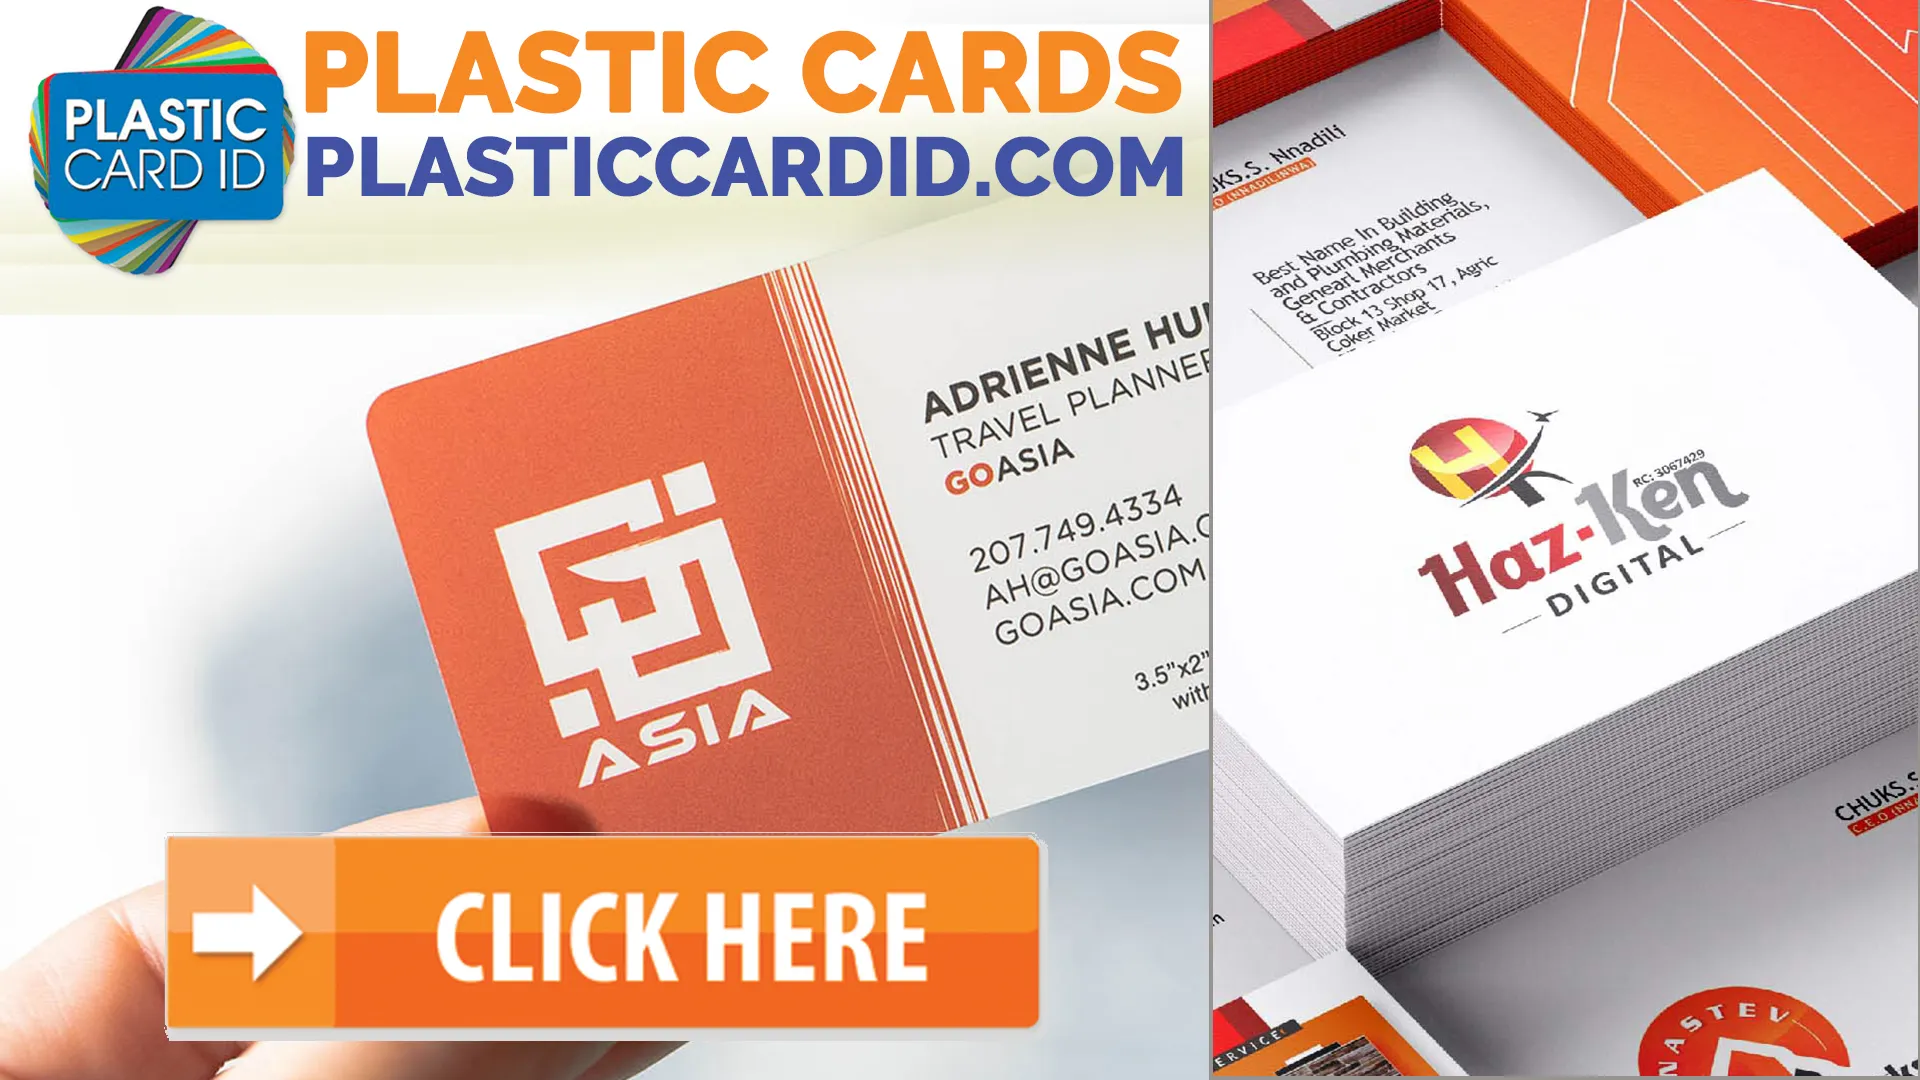 Welcome to Plastic Card ID




: Your Go-To for Custom Litho Printed Cards